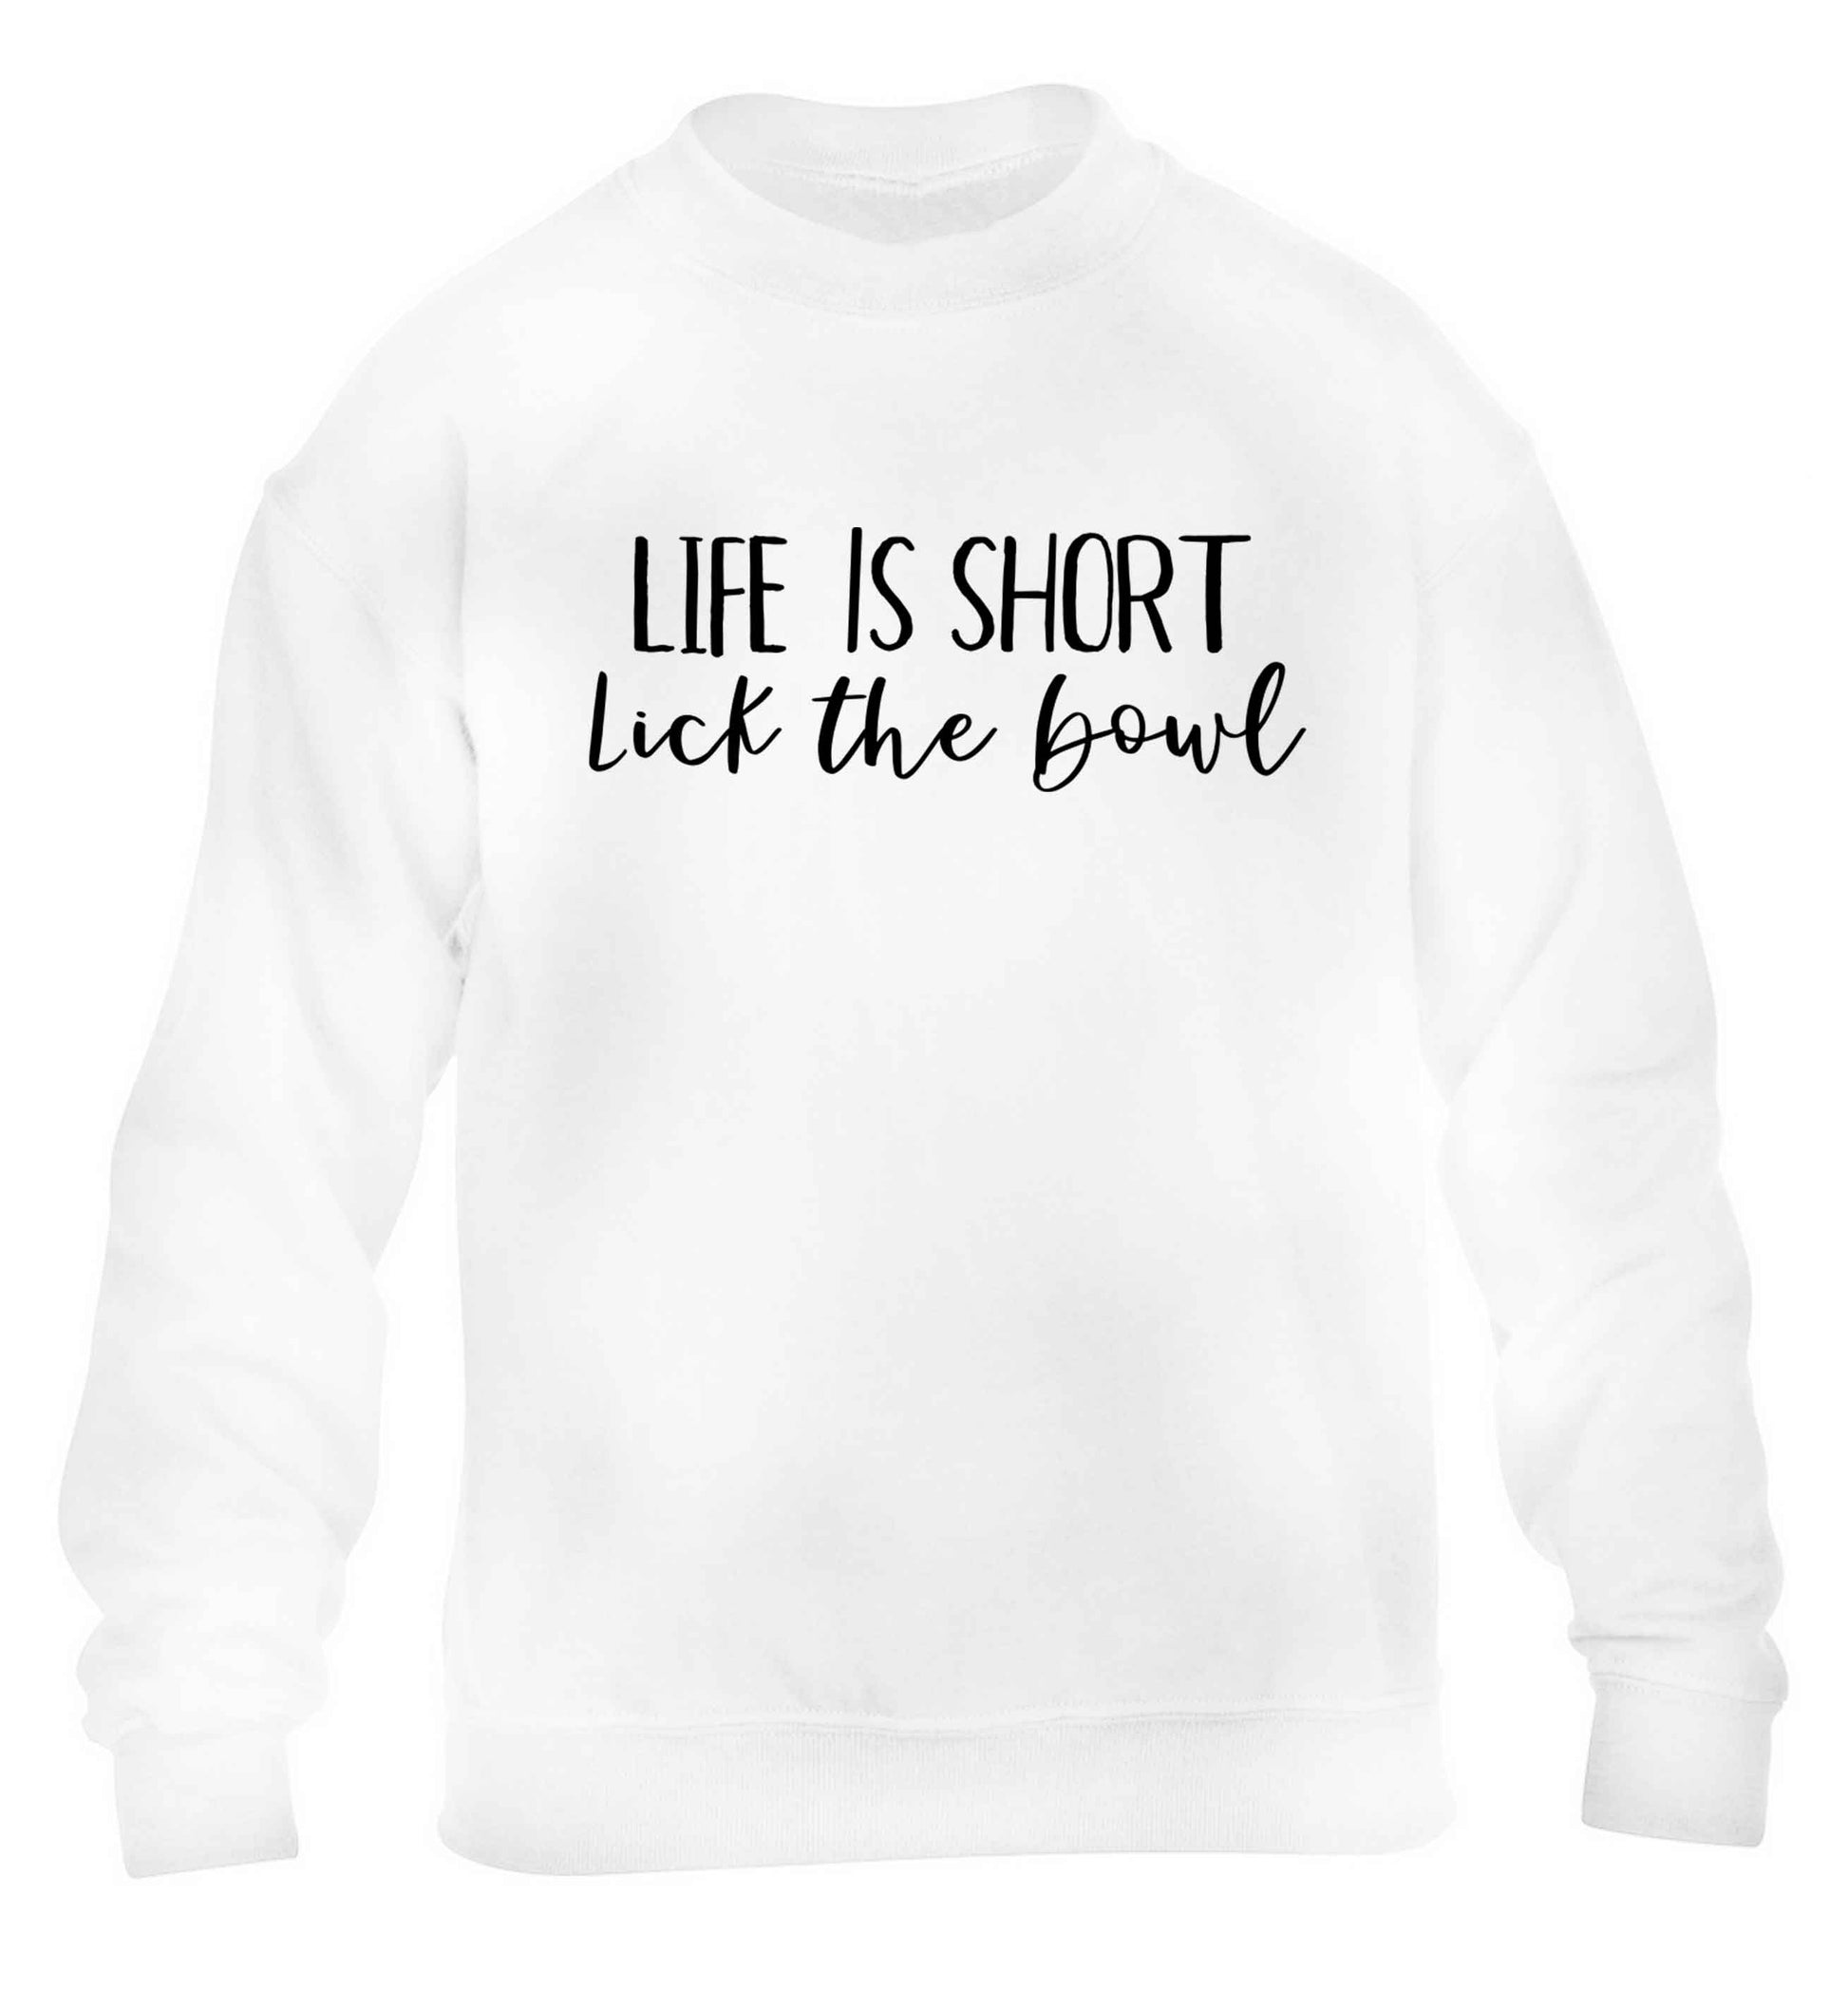 Life is short lick the bowl children's white sweater 12-13 Years